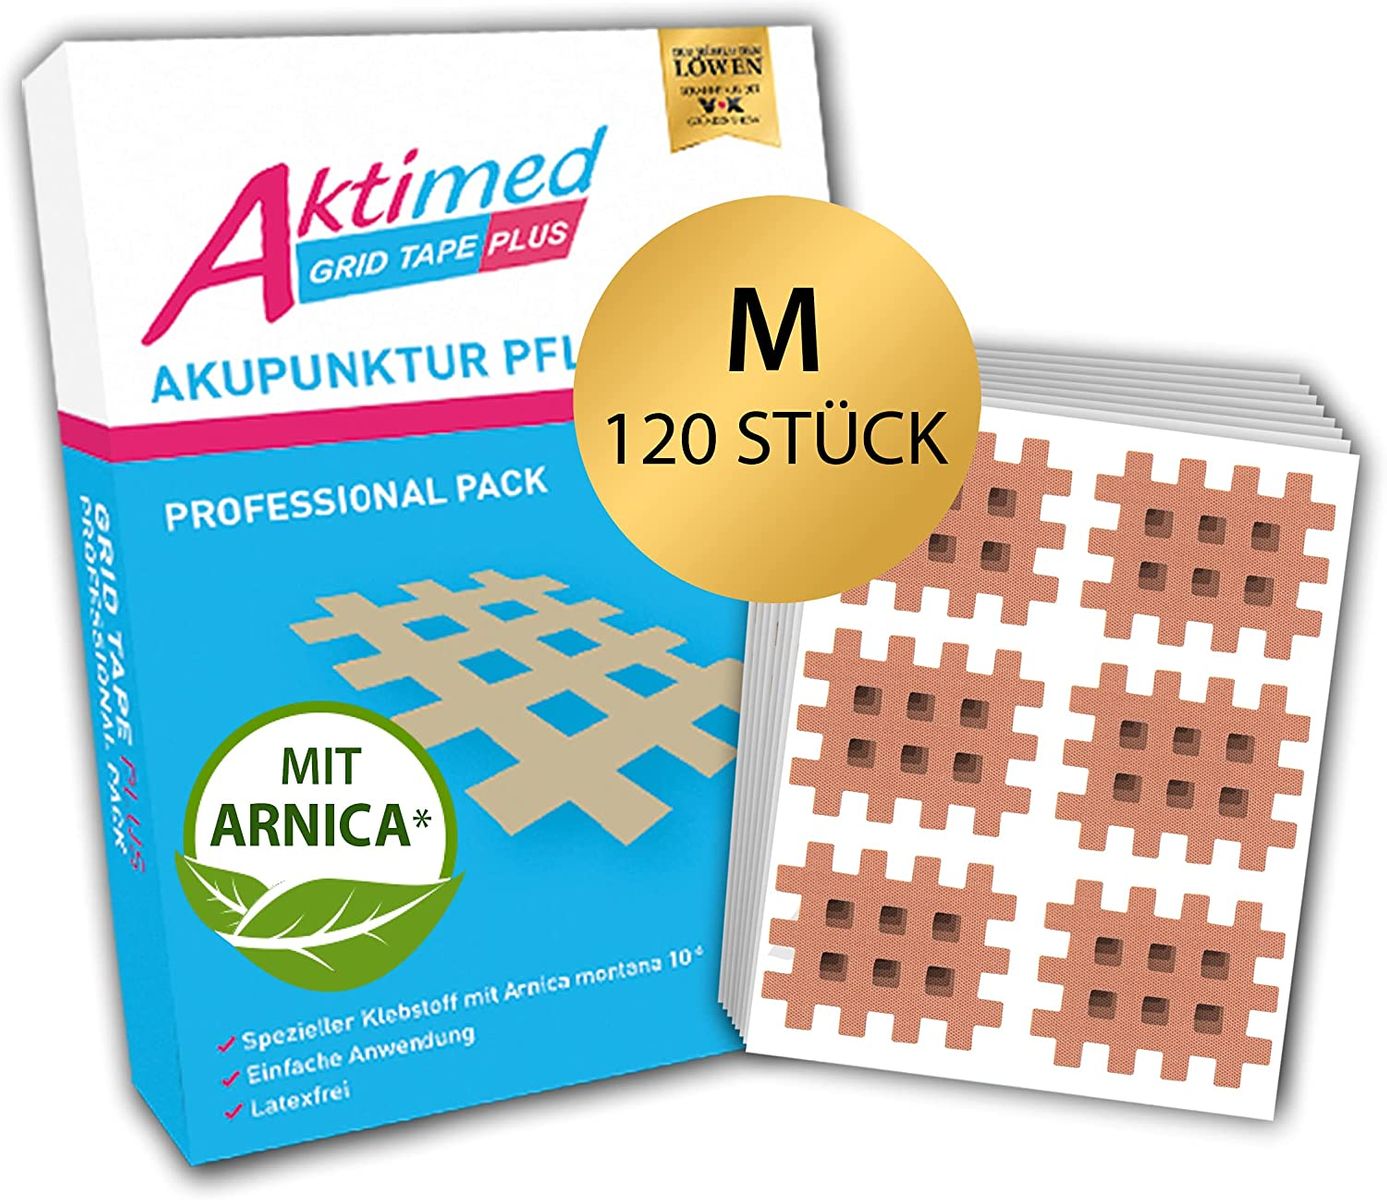 AKTIMED Grid Tape PLUS Professional Pack - patent based grid tape with natural extract Arnica D6 - acupuncture patch dermatologically tested - Crosstape grid tape pain points Medium